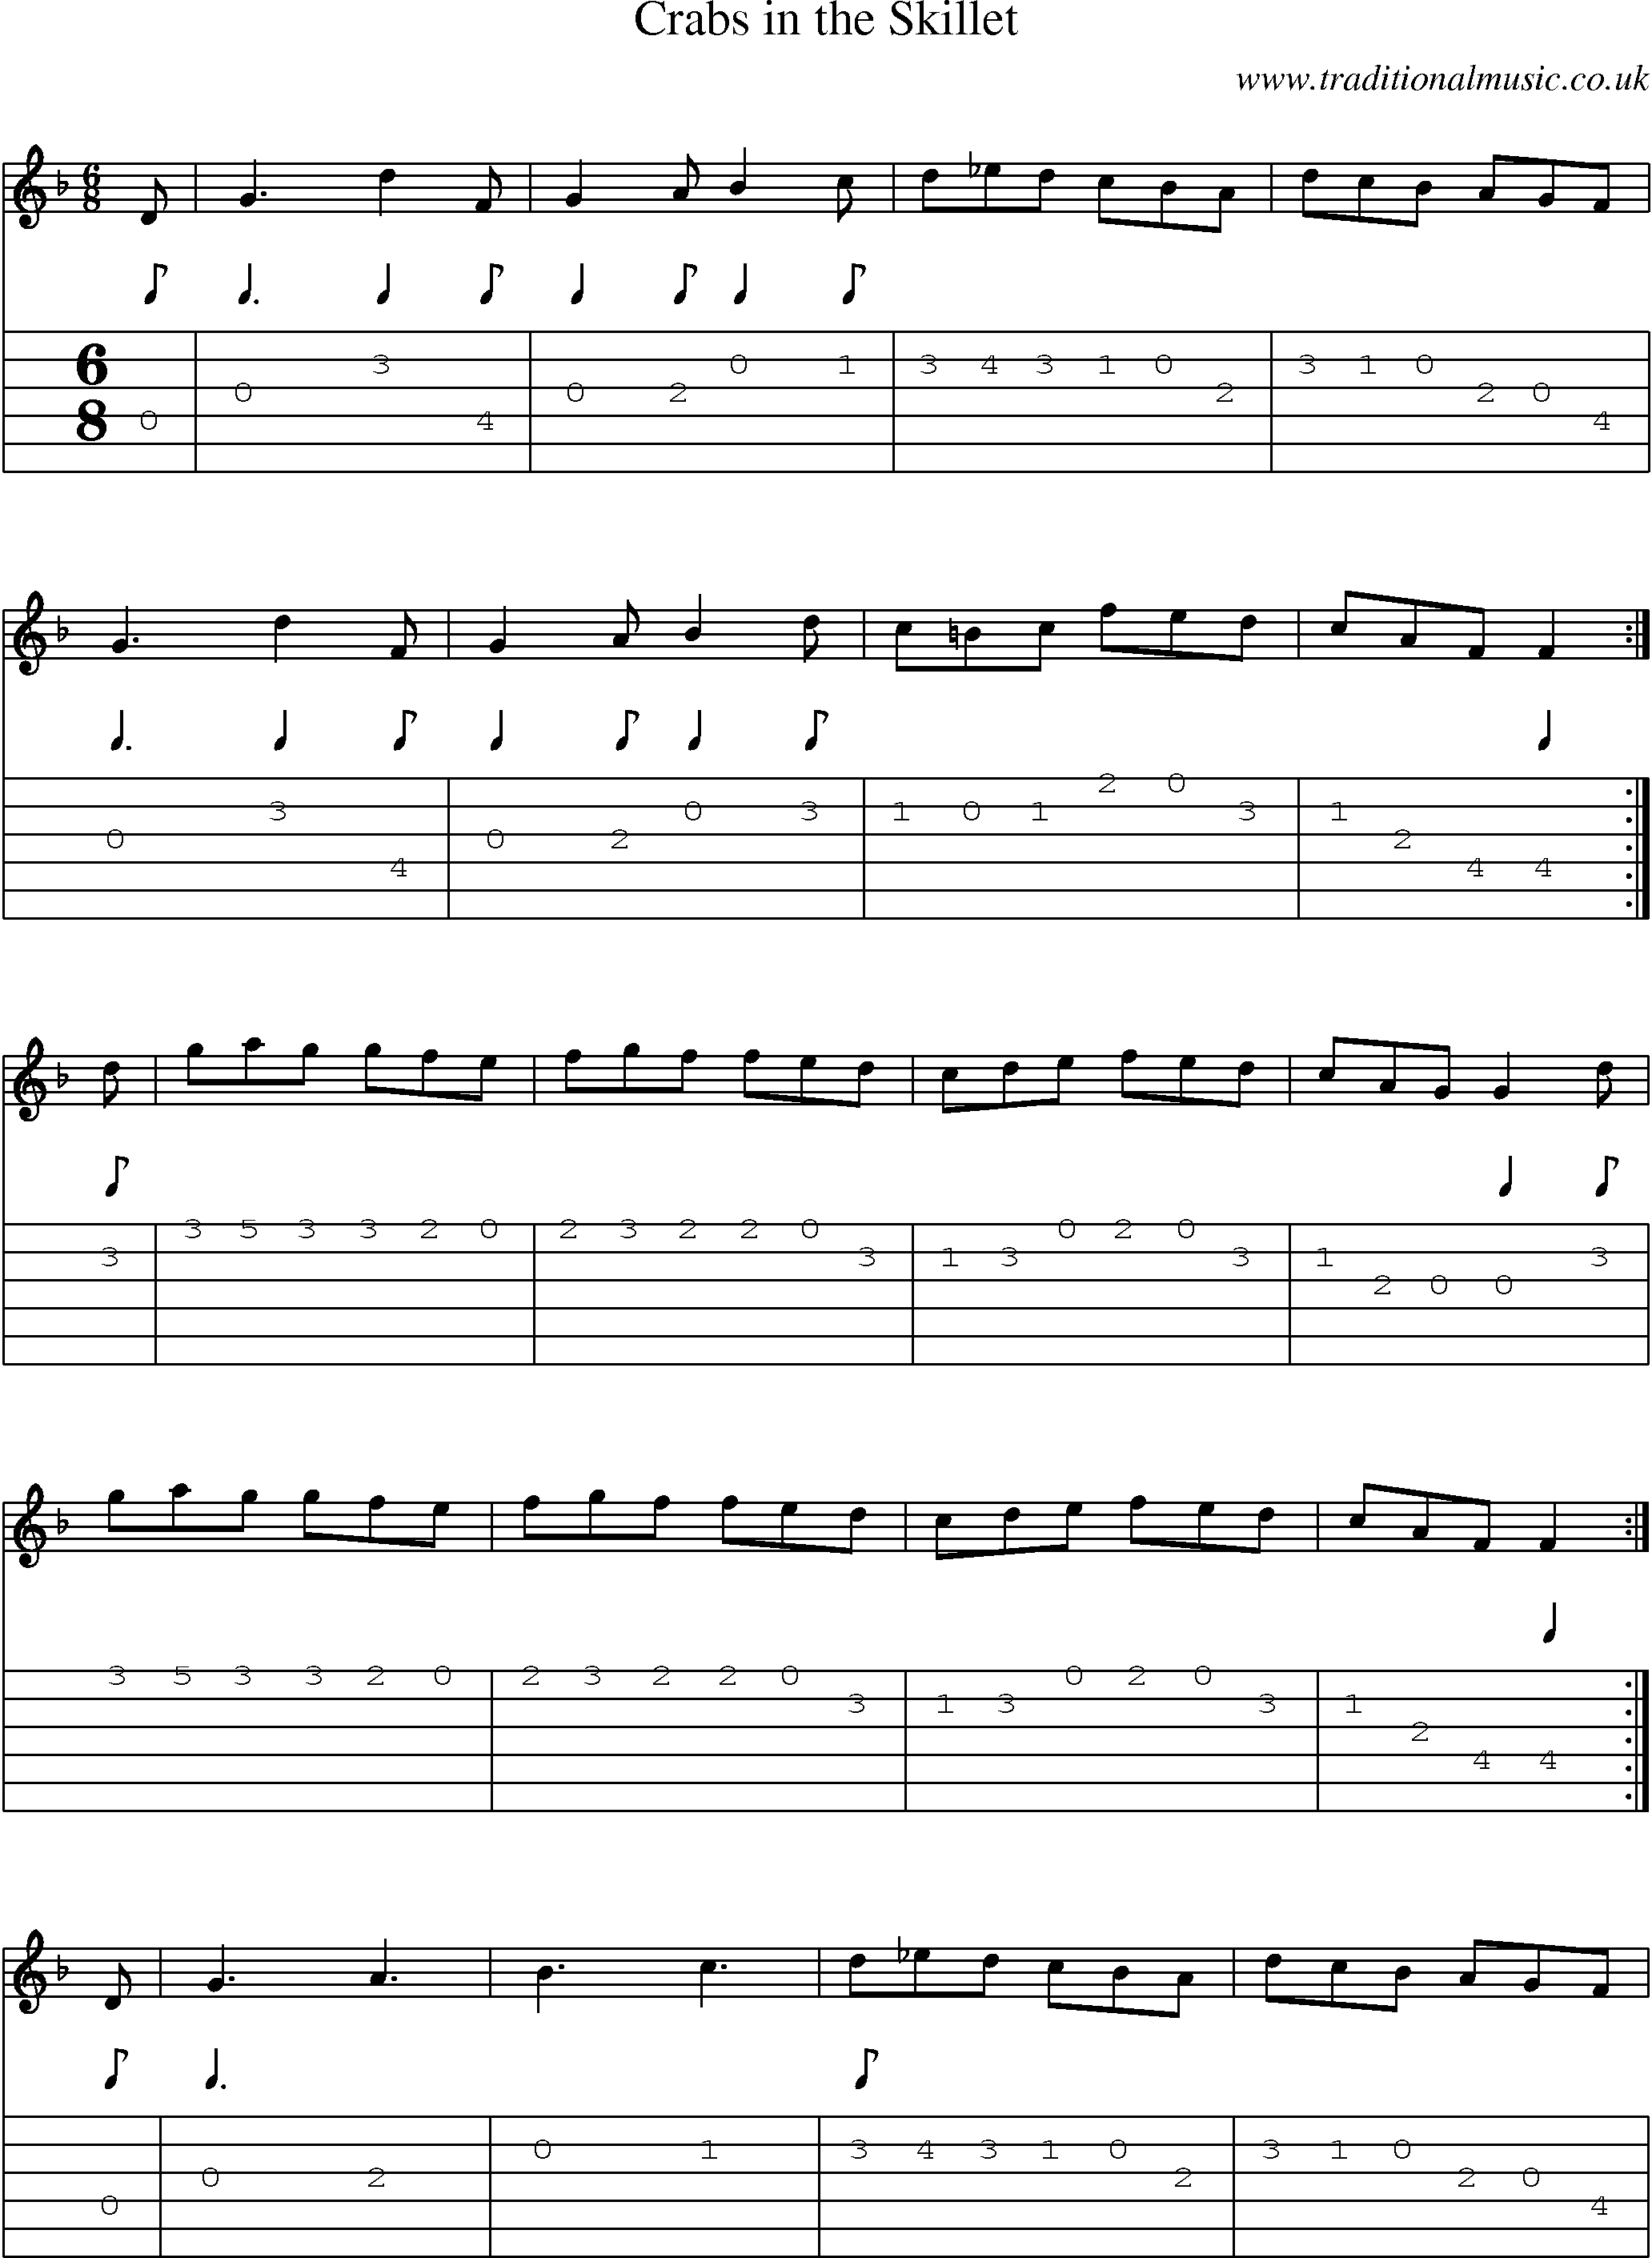 Music Score and Guitar Tabs for Crabs In Skillet